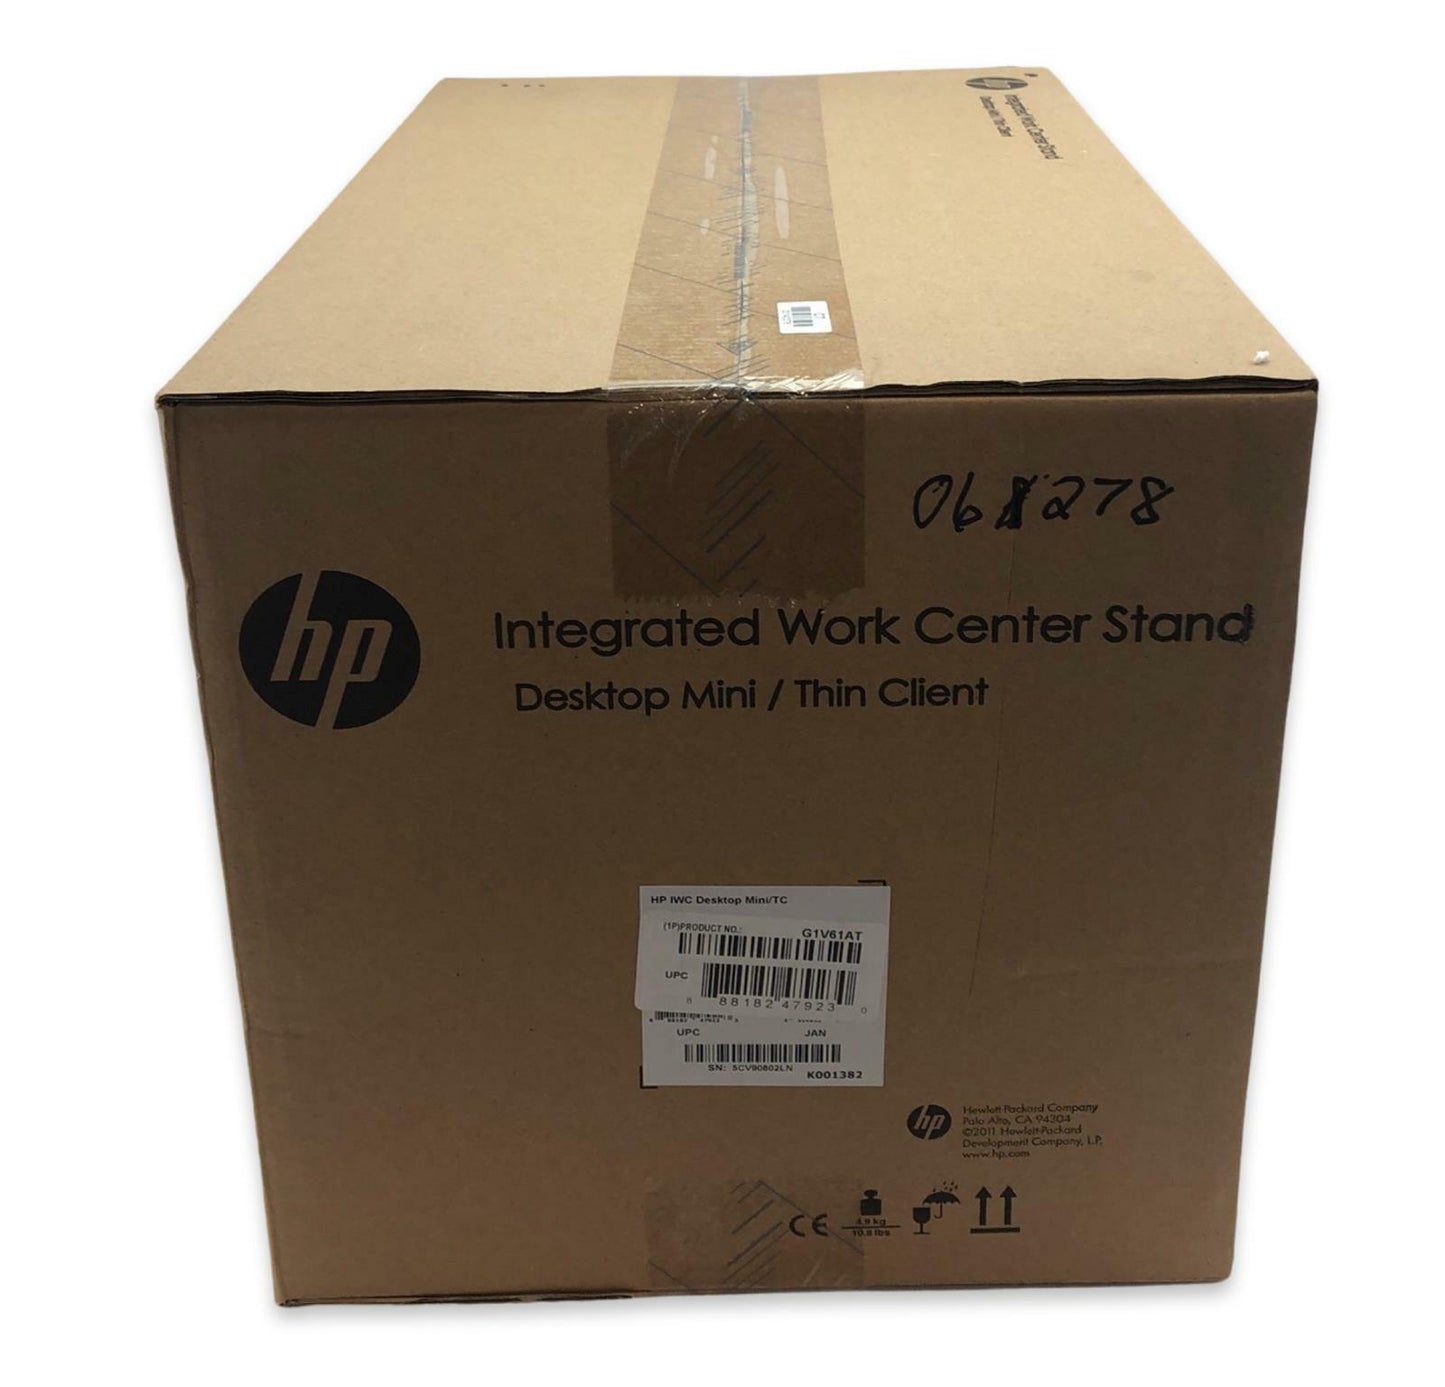 NEW - HP IWC Integrated Work Center Stand - Desktop Mini / Thin Client - G1V61AT